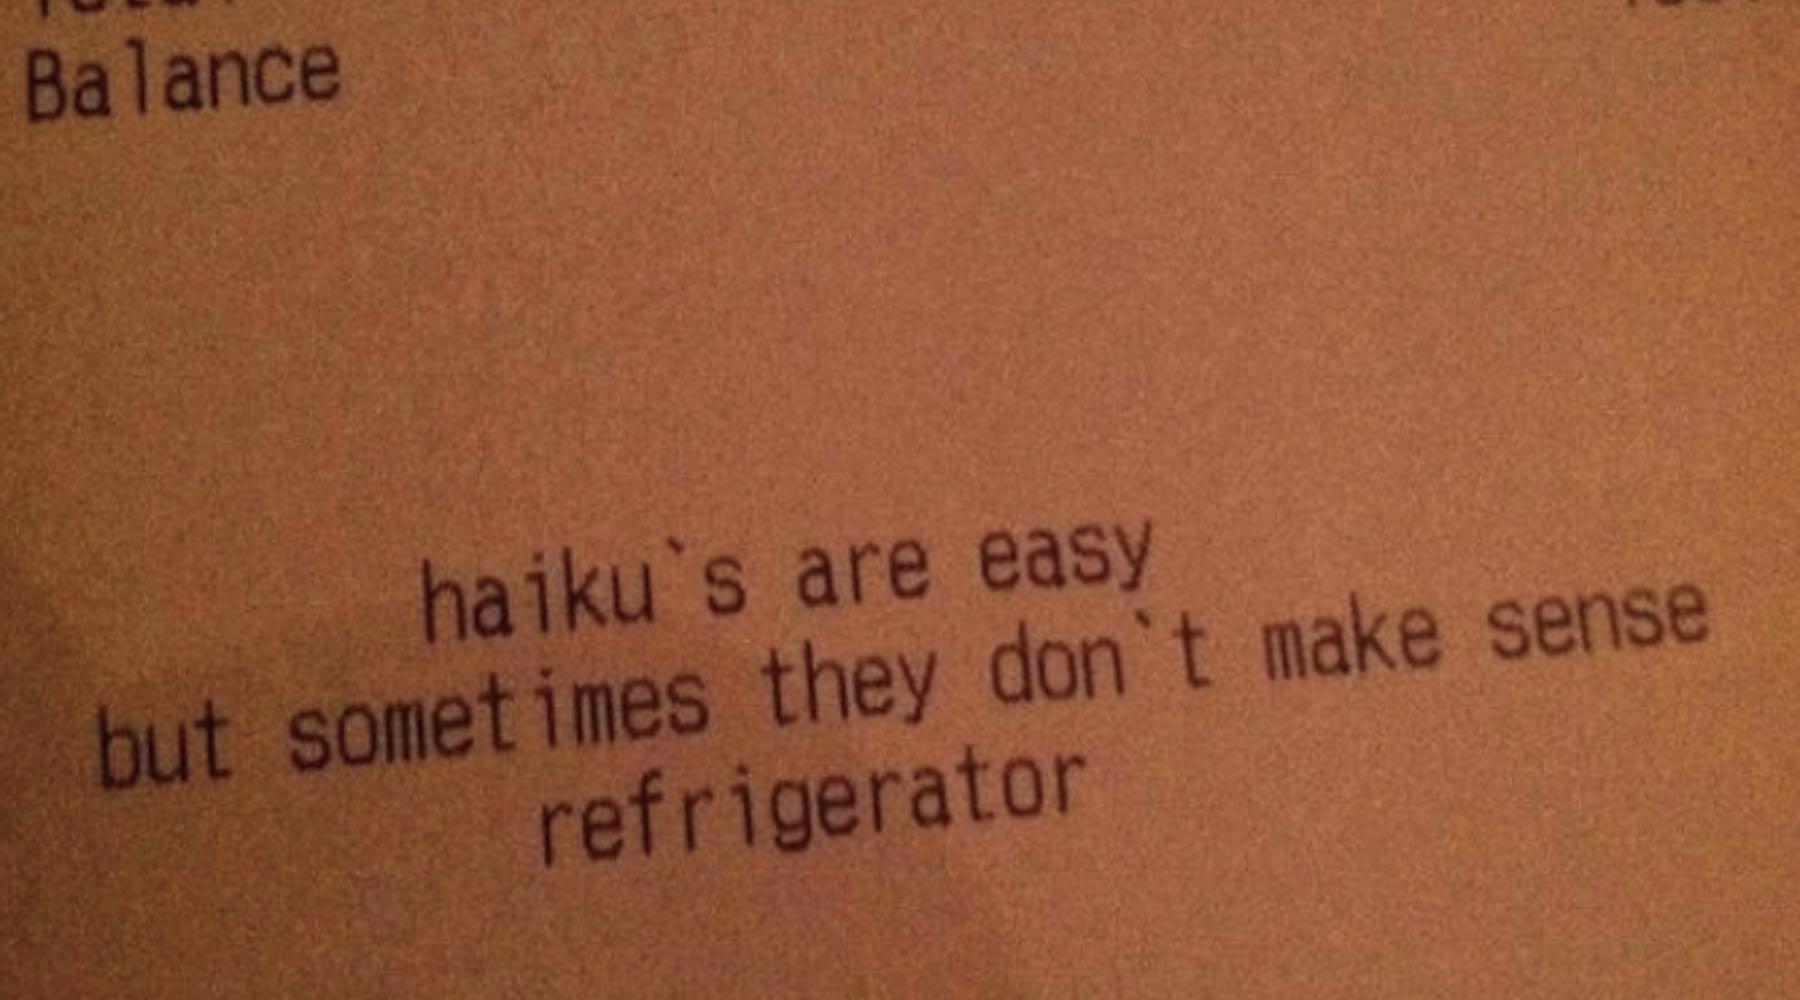 These Hilarious Receipts Are So Absurd They're Funny